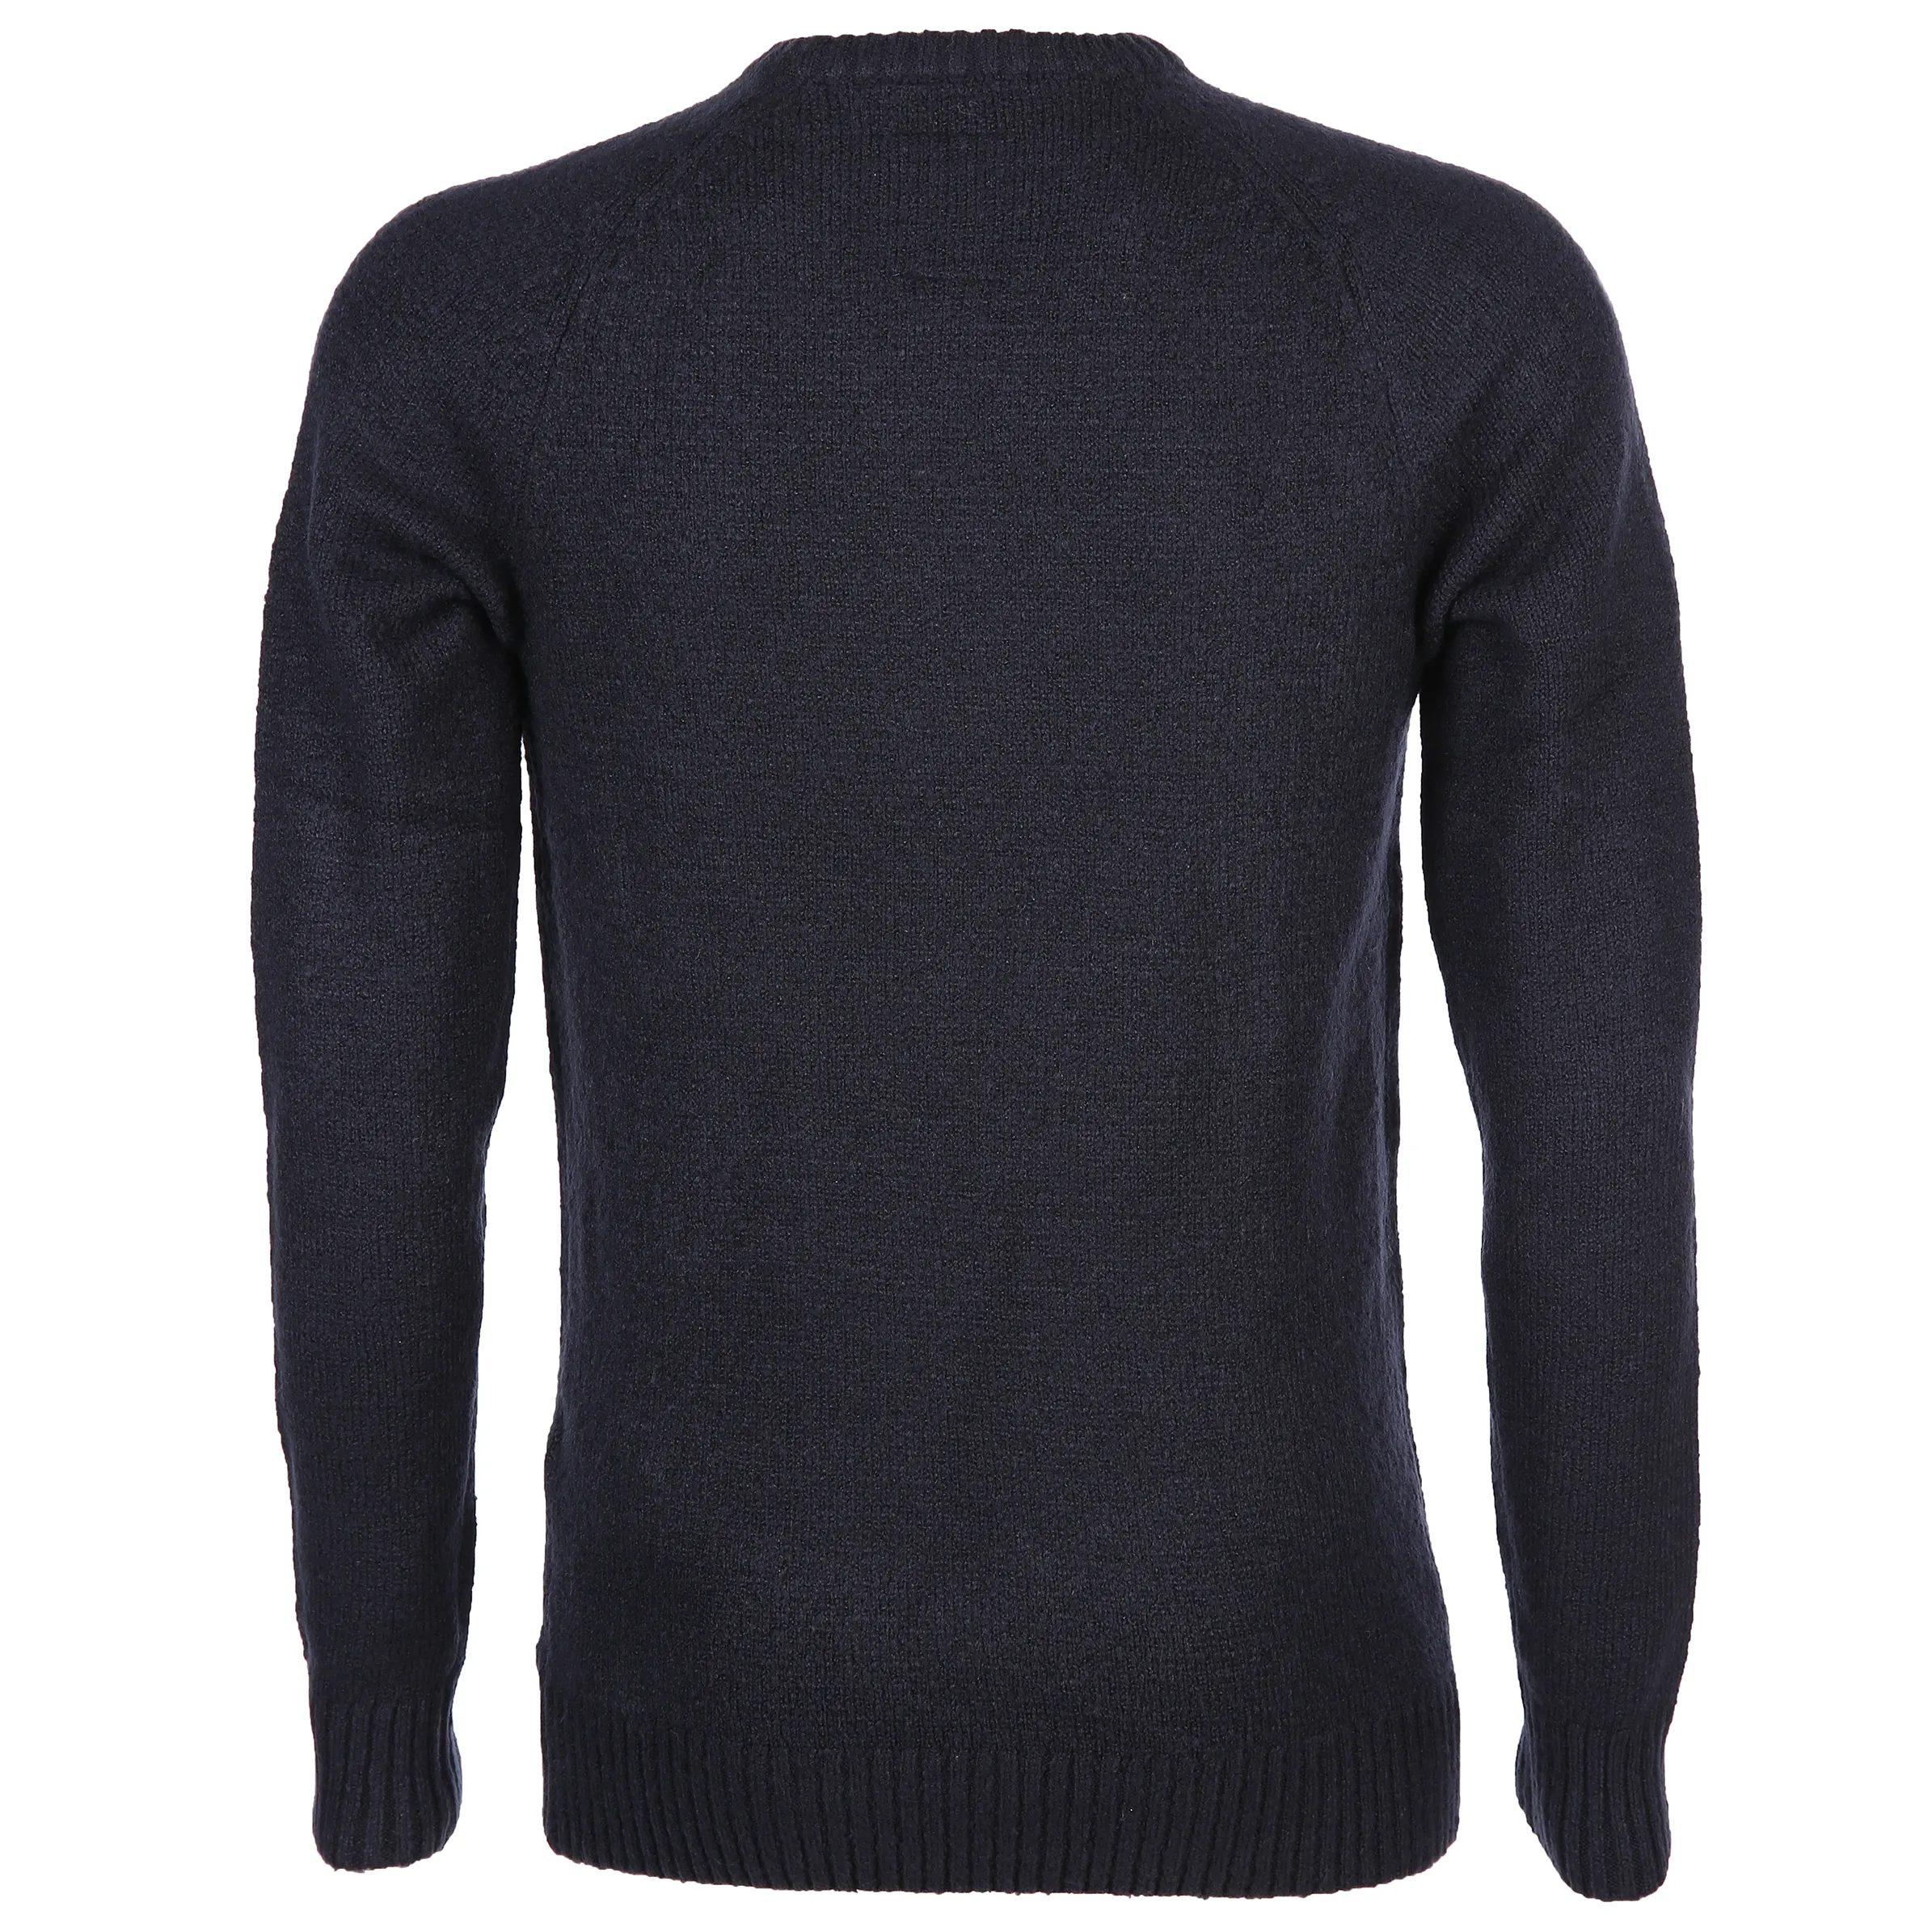 Tom Tailor 1005645 cosy knitted sweater Blau 800010 10690 2